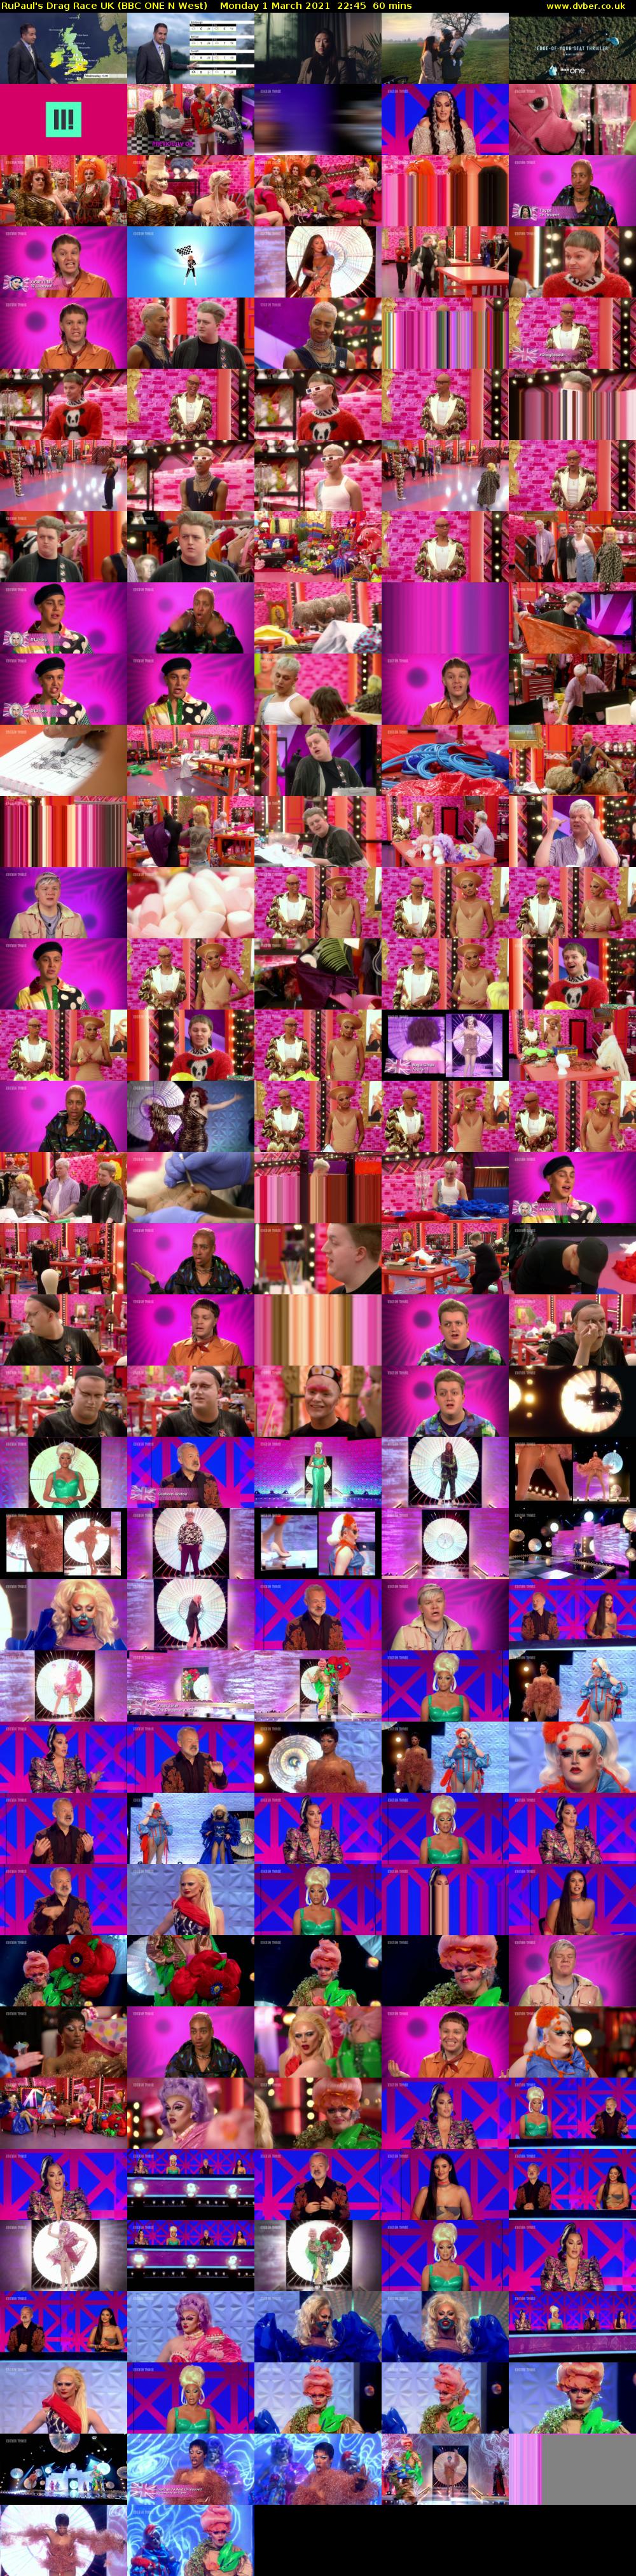 RuPaul's Drag Race UK (BBC ONE N West) Monday 1 March 2021 22:45 - 23:45